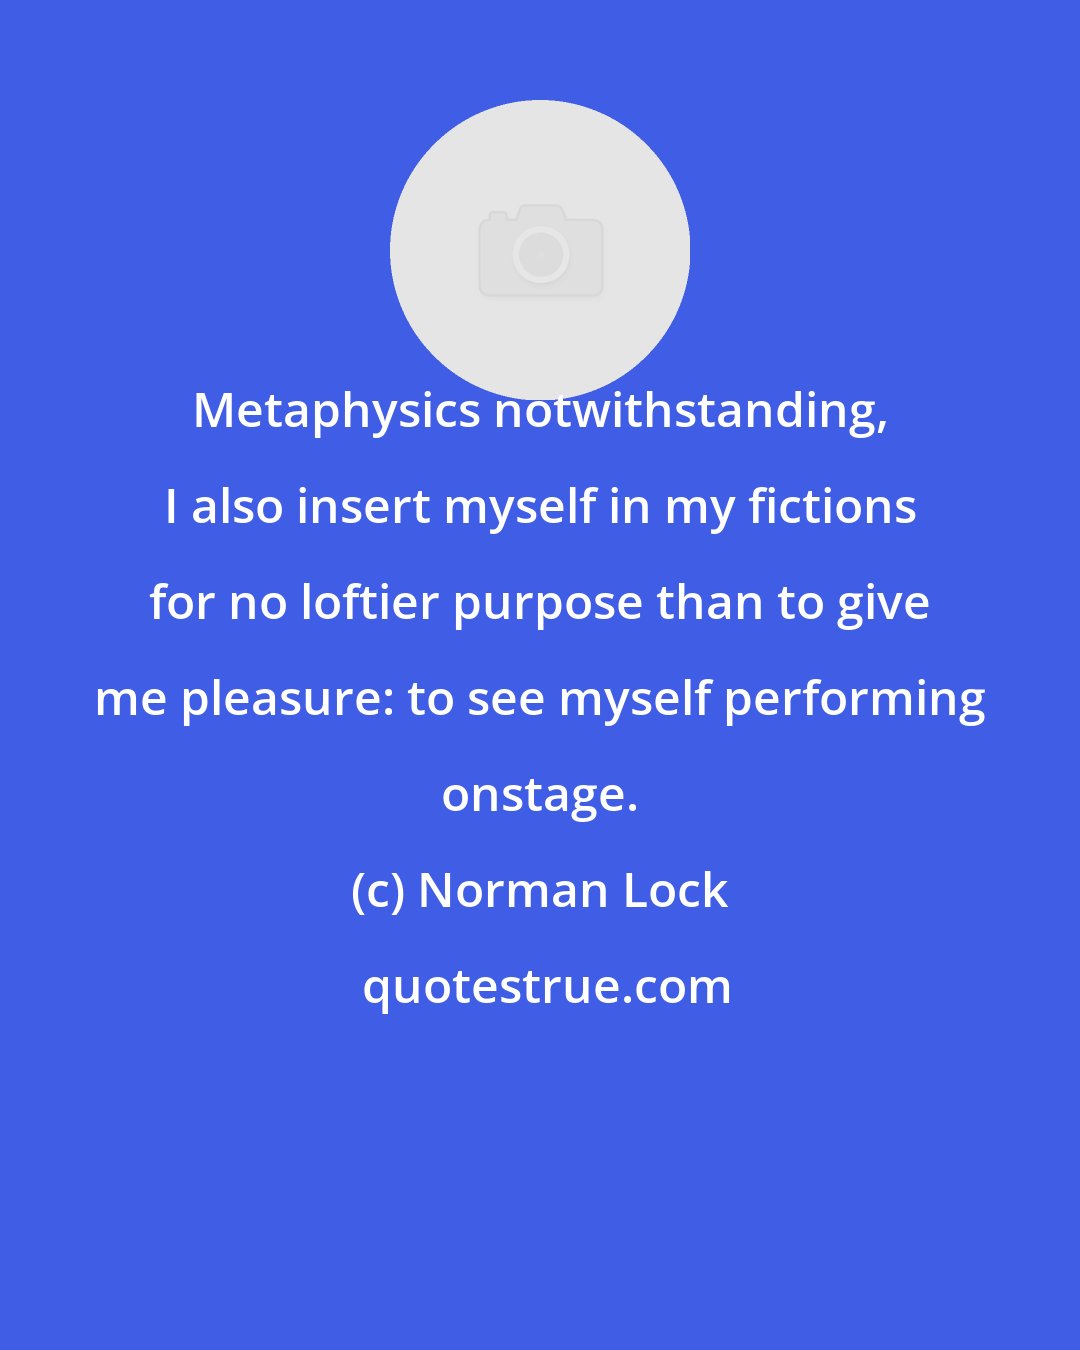 Norman Lock: Metaphysics notwithstanding, I also insert myself in my fictions for no loftier purpose than to give me pleasure: to see myself performing onstage.